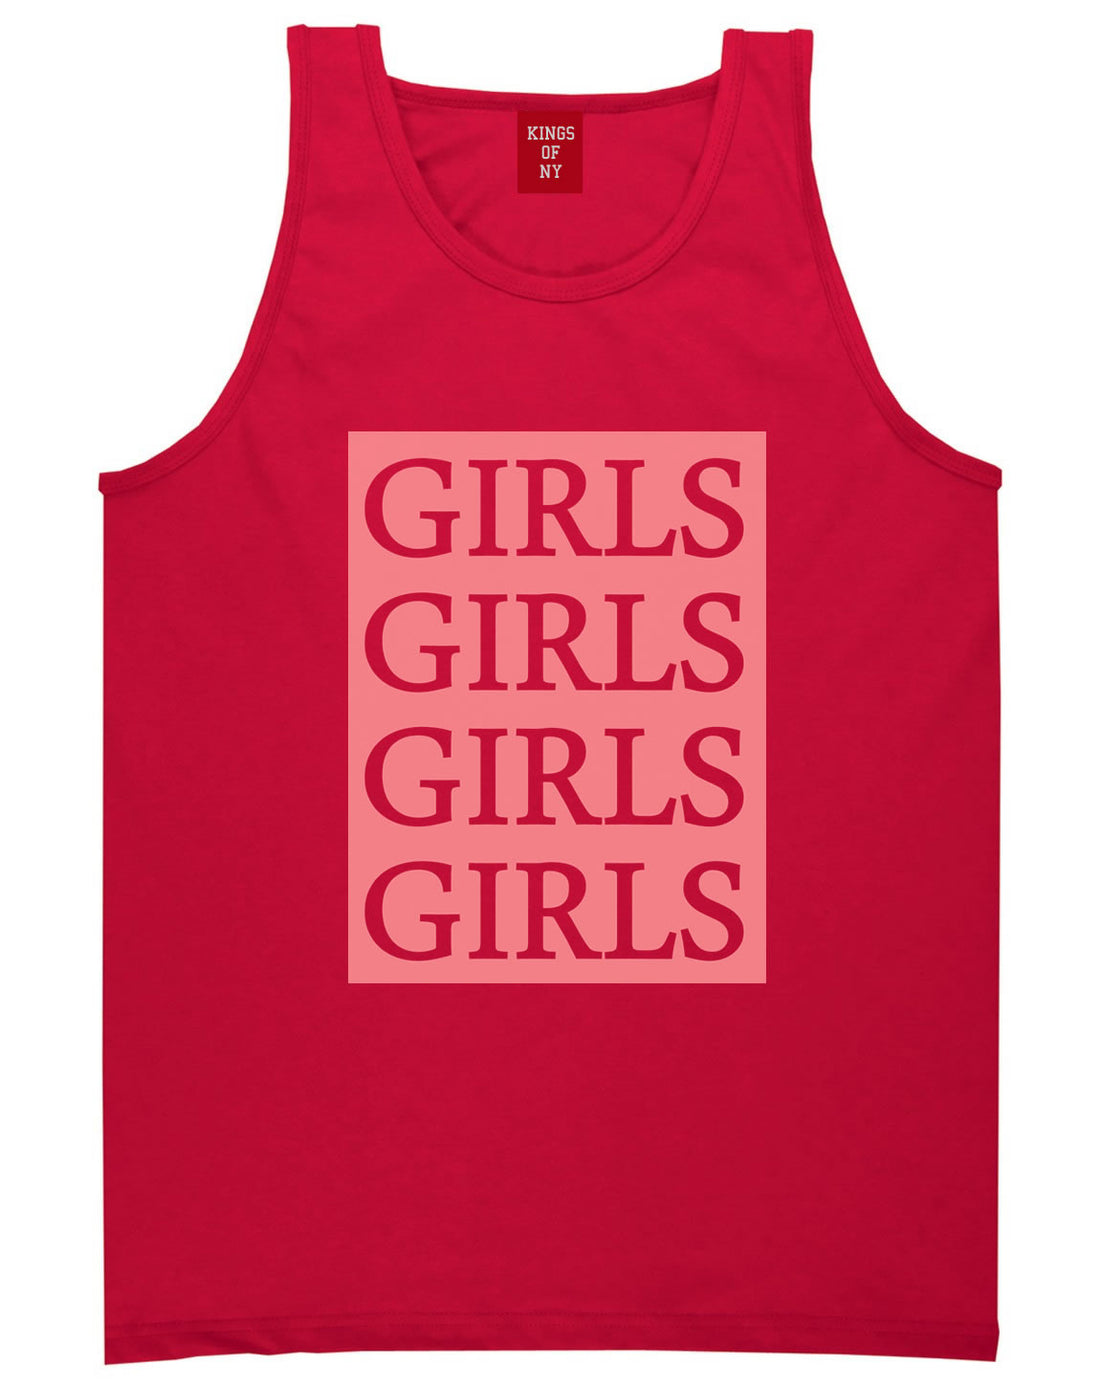 Girls Girls Girls Tank Top in Red by Kings Of NY